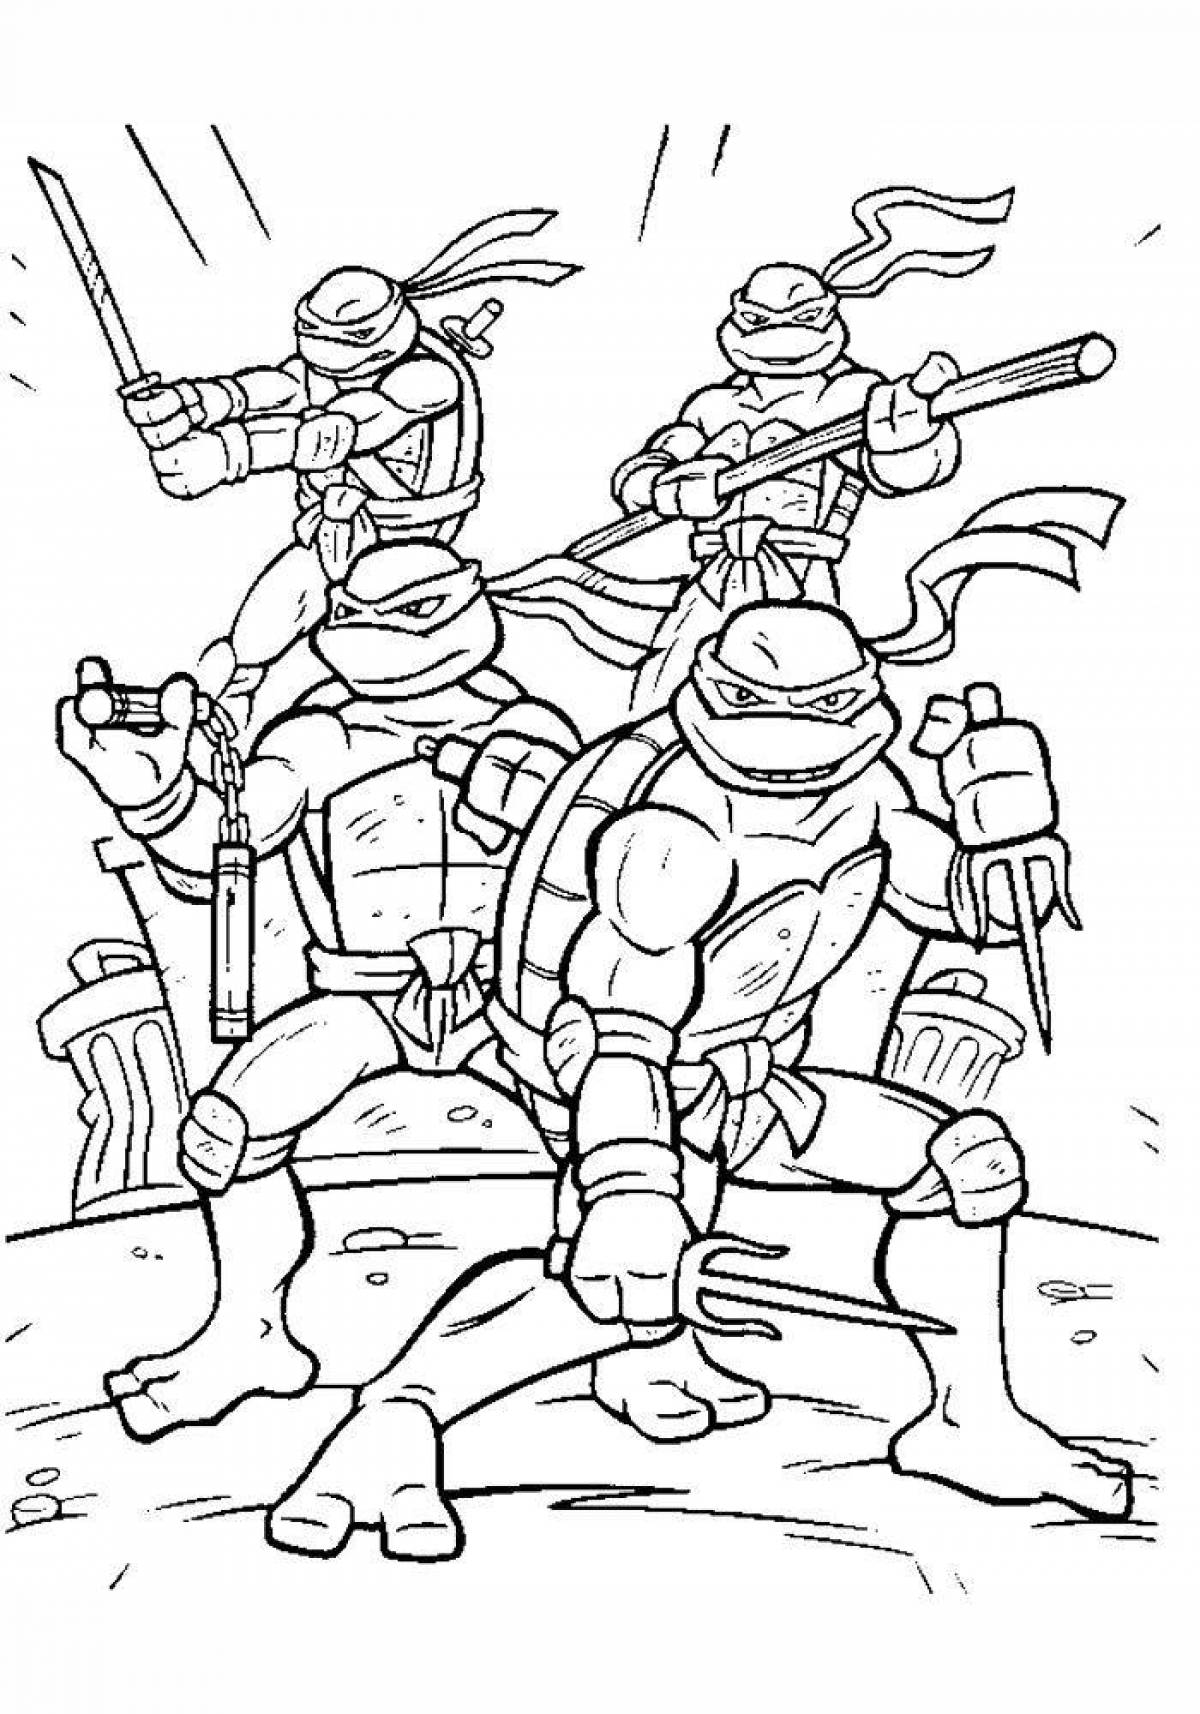 Radiant ninja turtles coloring page for boys